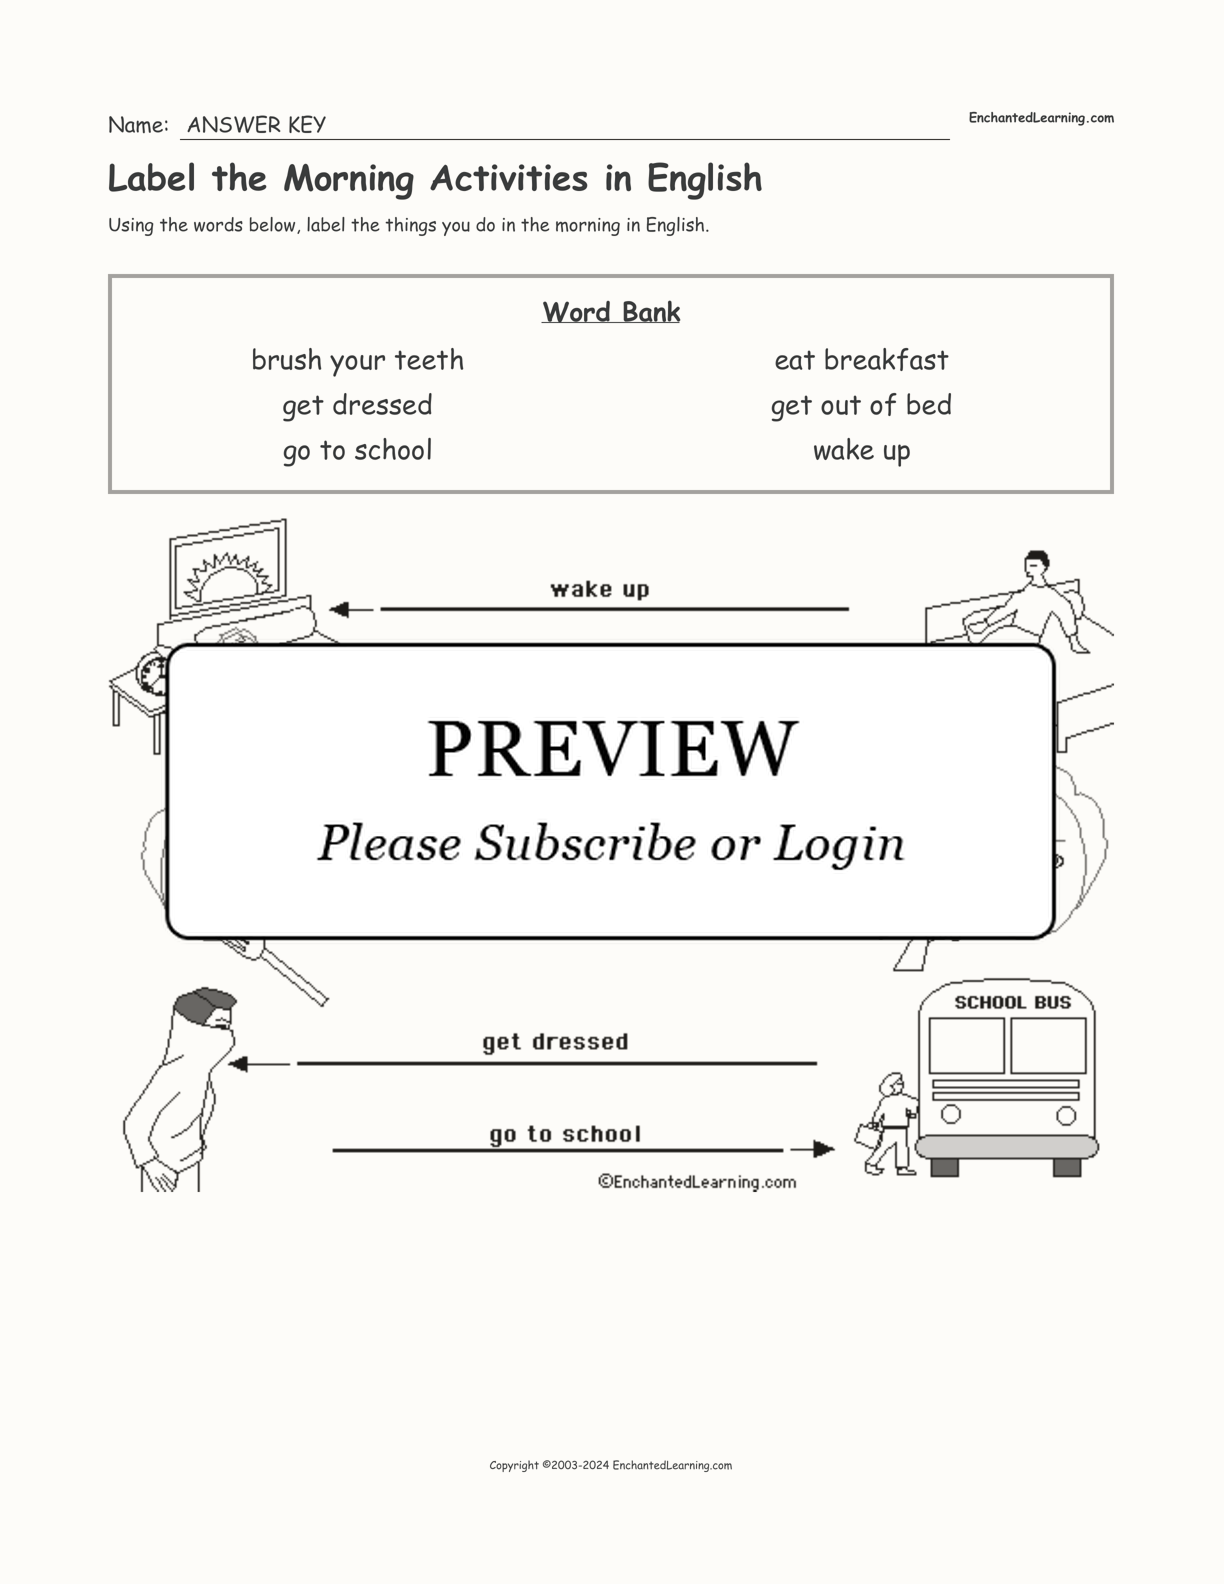 Label the Morning Activities in English interactive worksheet page 2